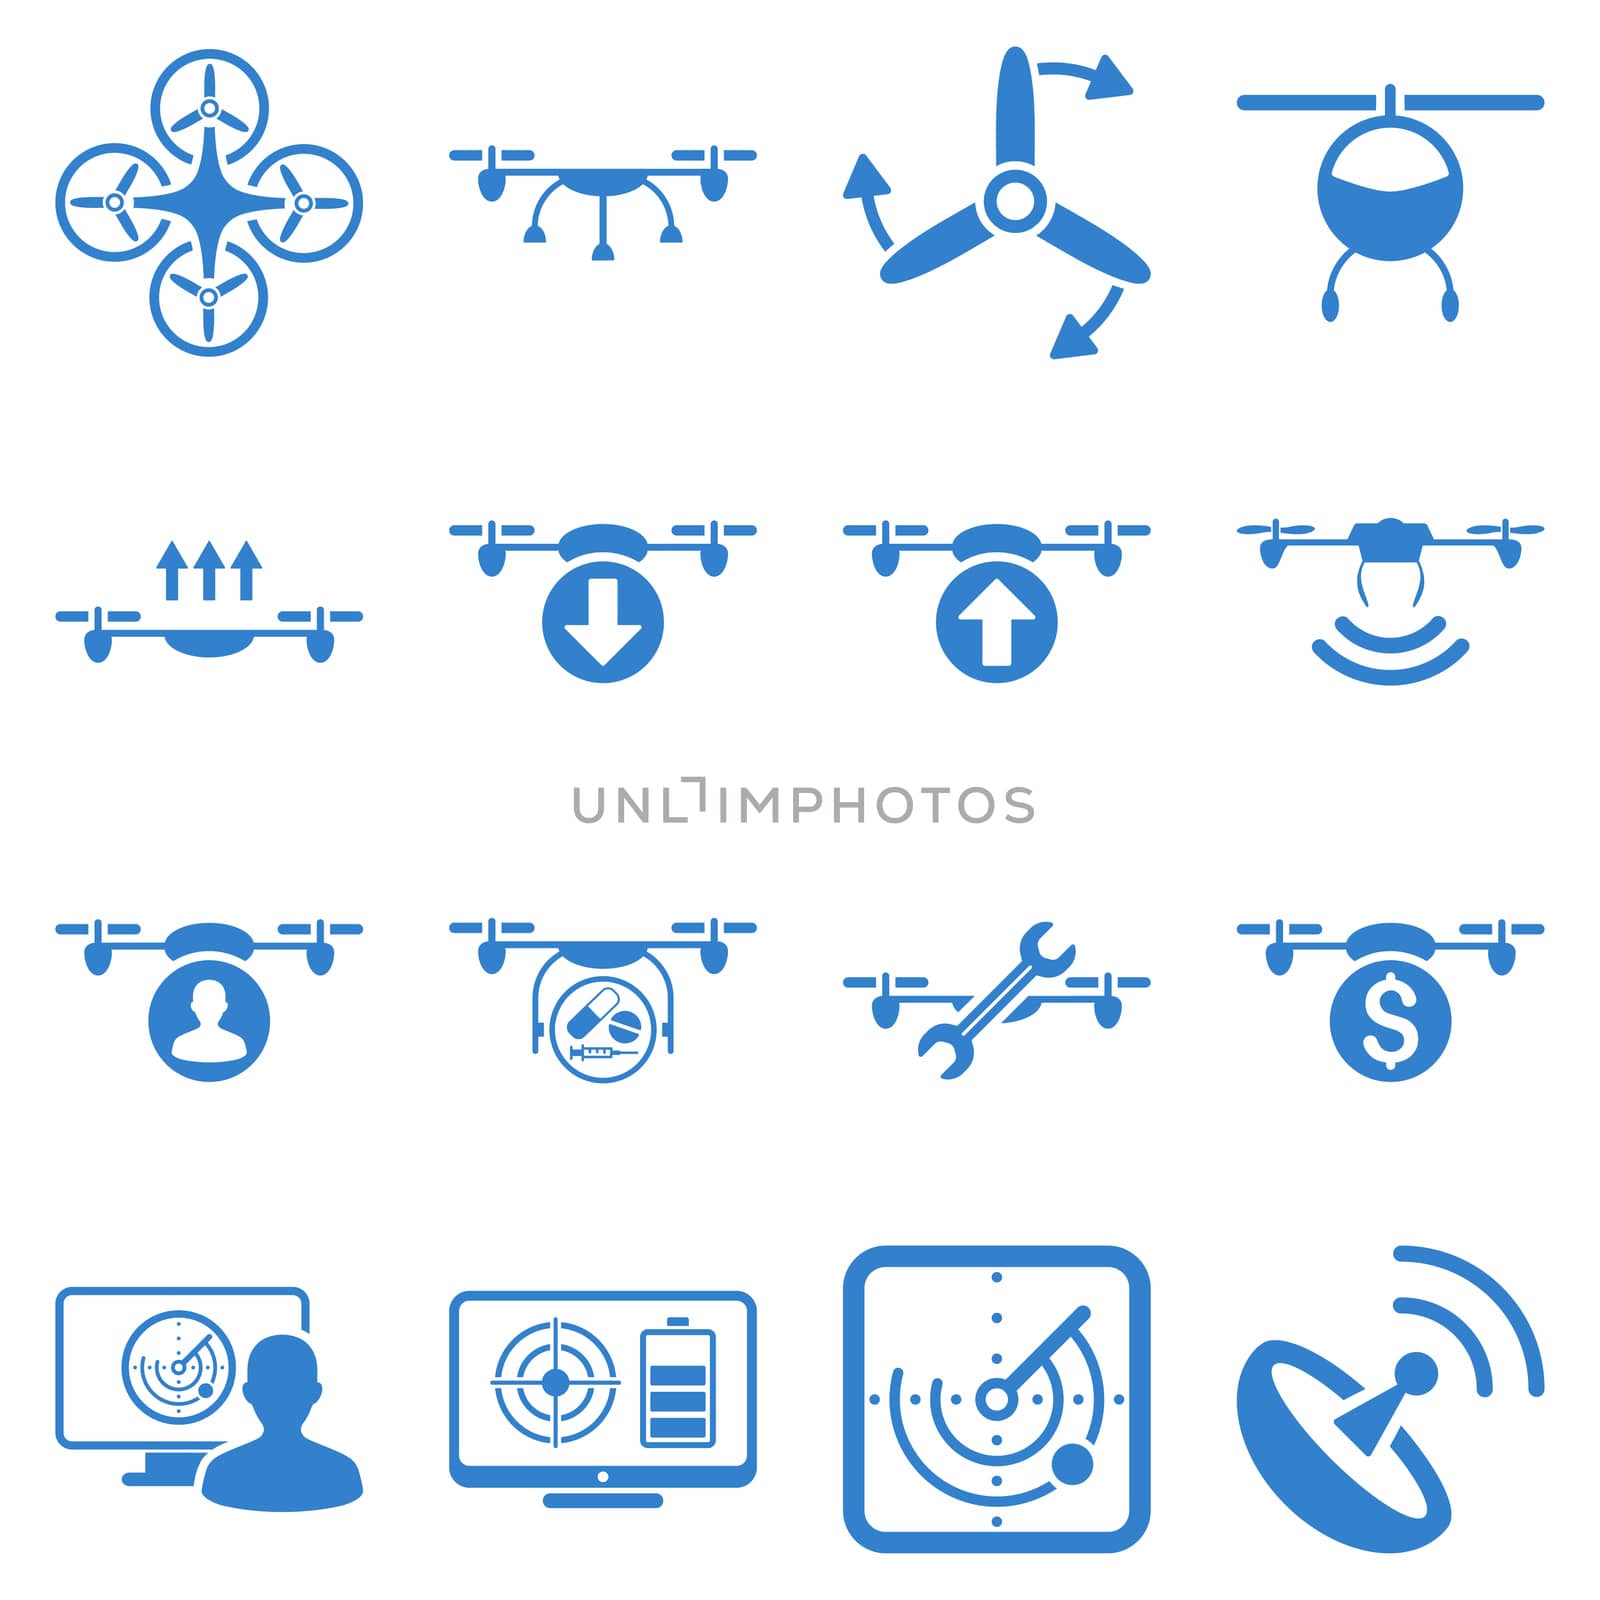 Quadcopter service icon set designed with cobalt color. These flat pictograms are isolated on a white background.